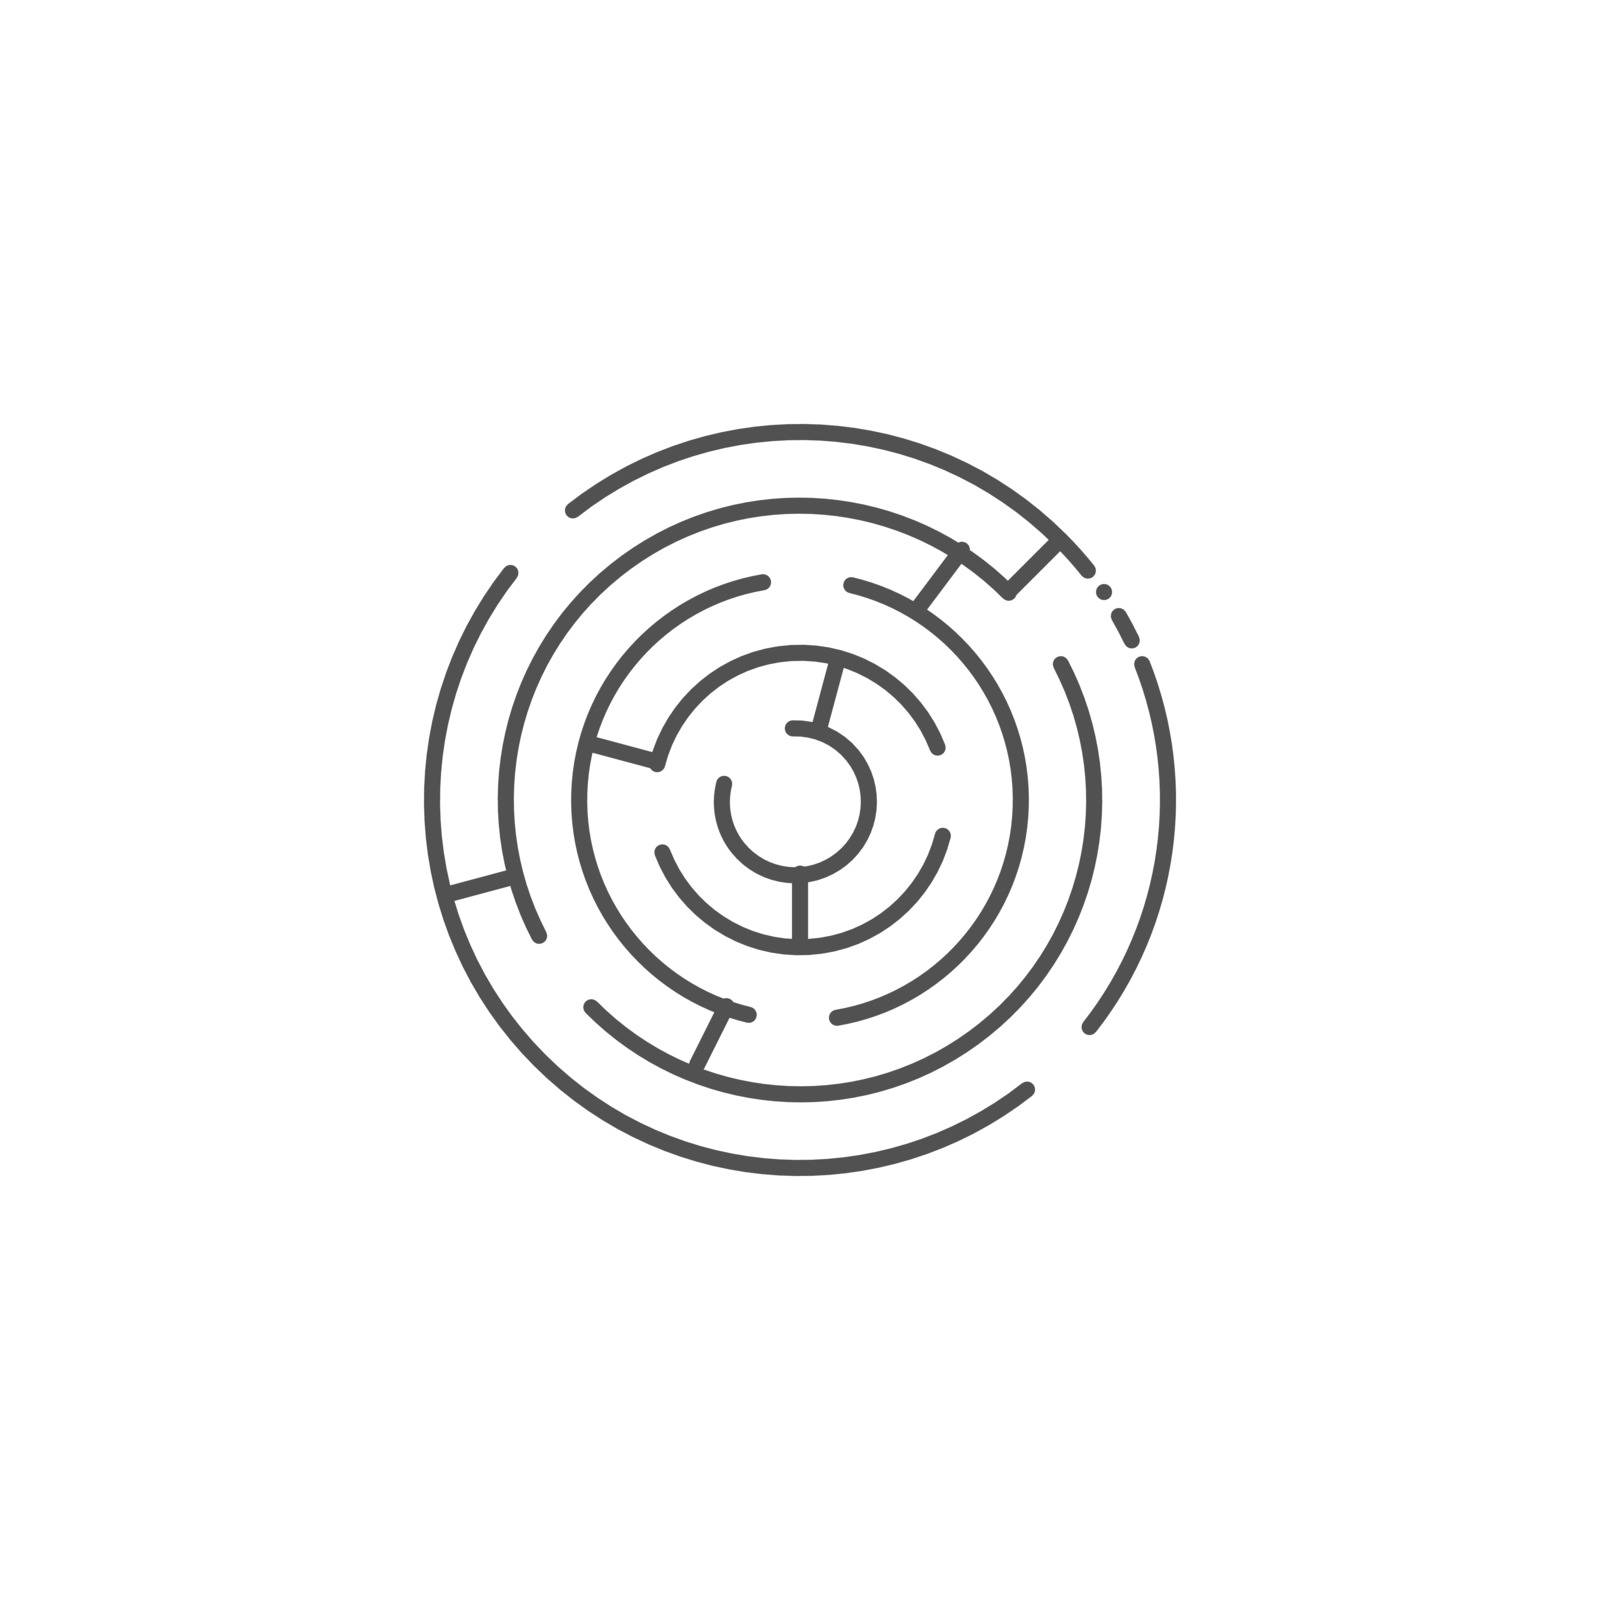 Labyrinth Thin Line Vector Icon. Flat icon isolated on the white background. Editable EPS file. Vector illustration.